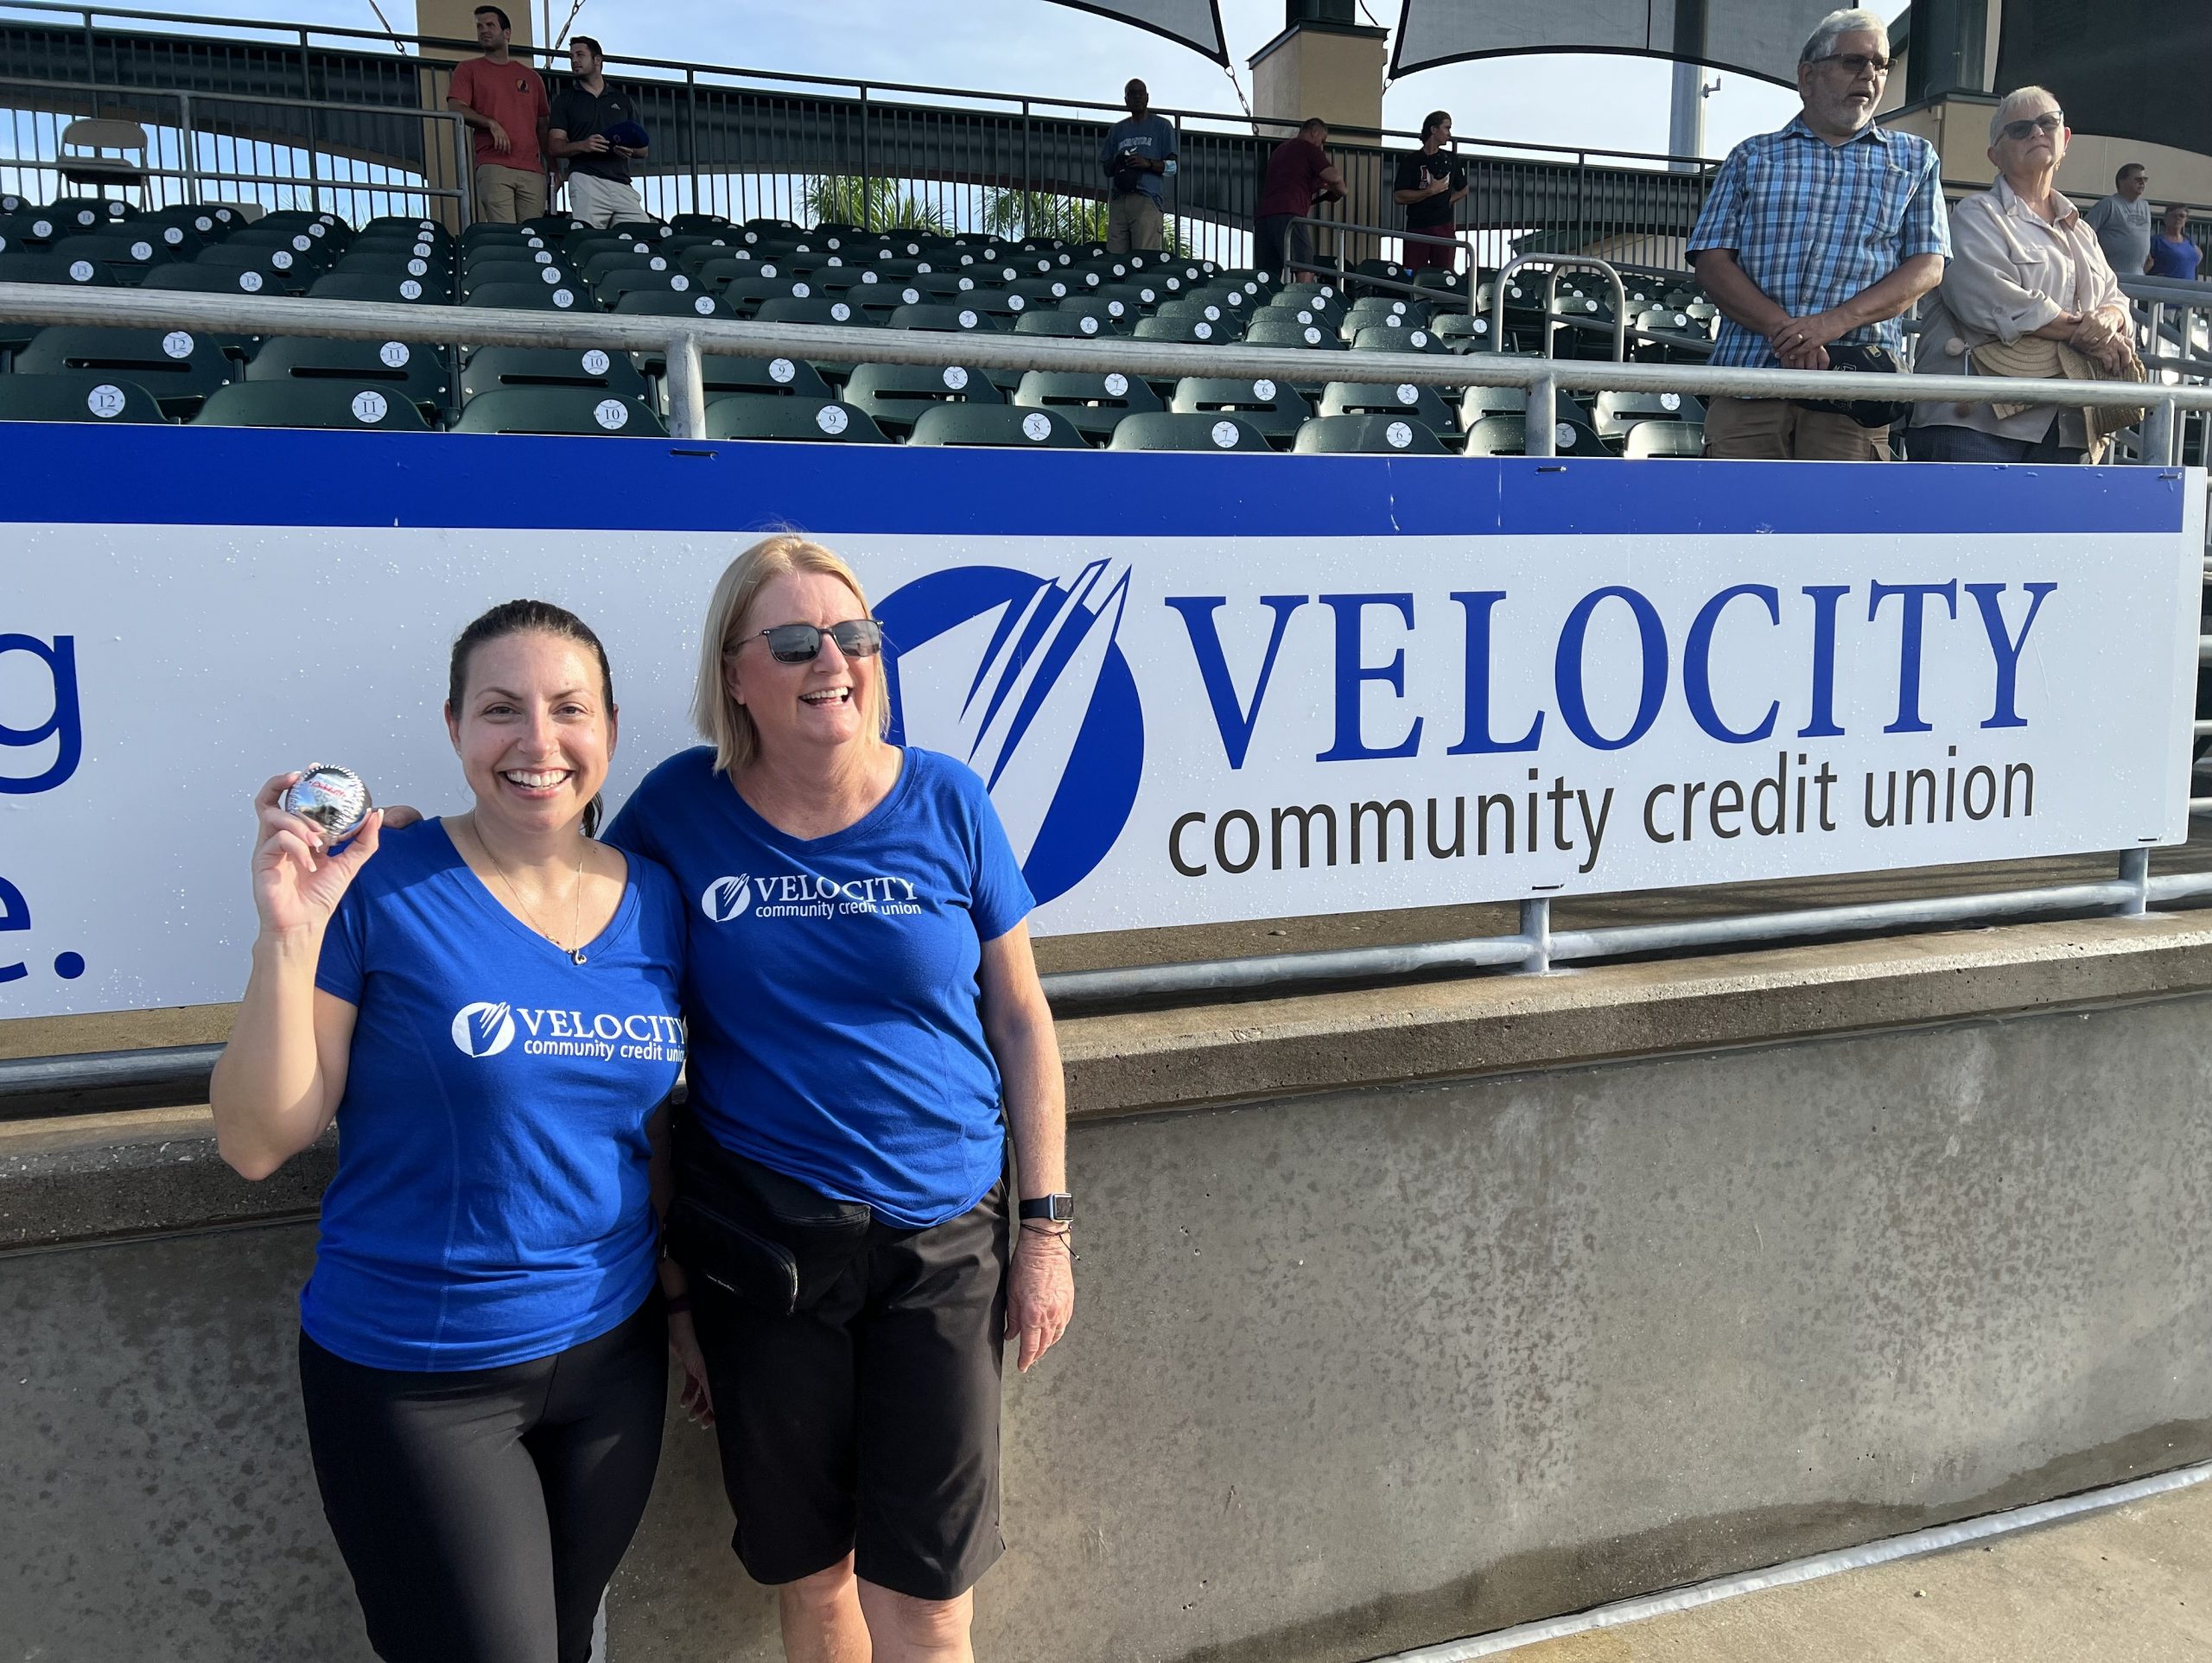 VCCU supporting community events at Roger Dean Stadium